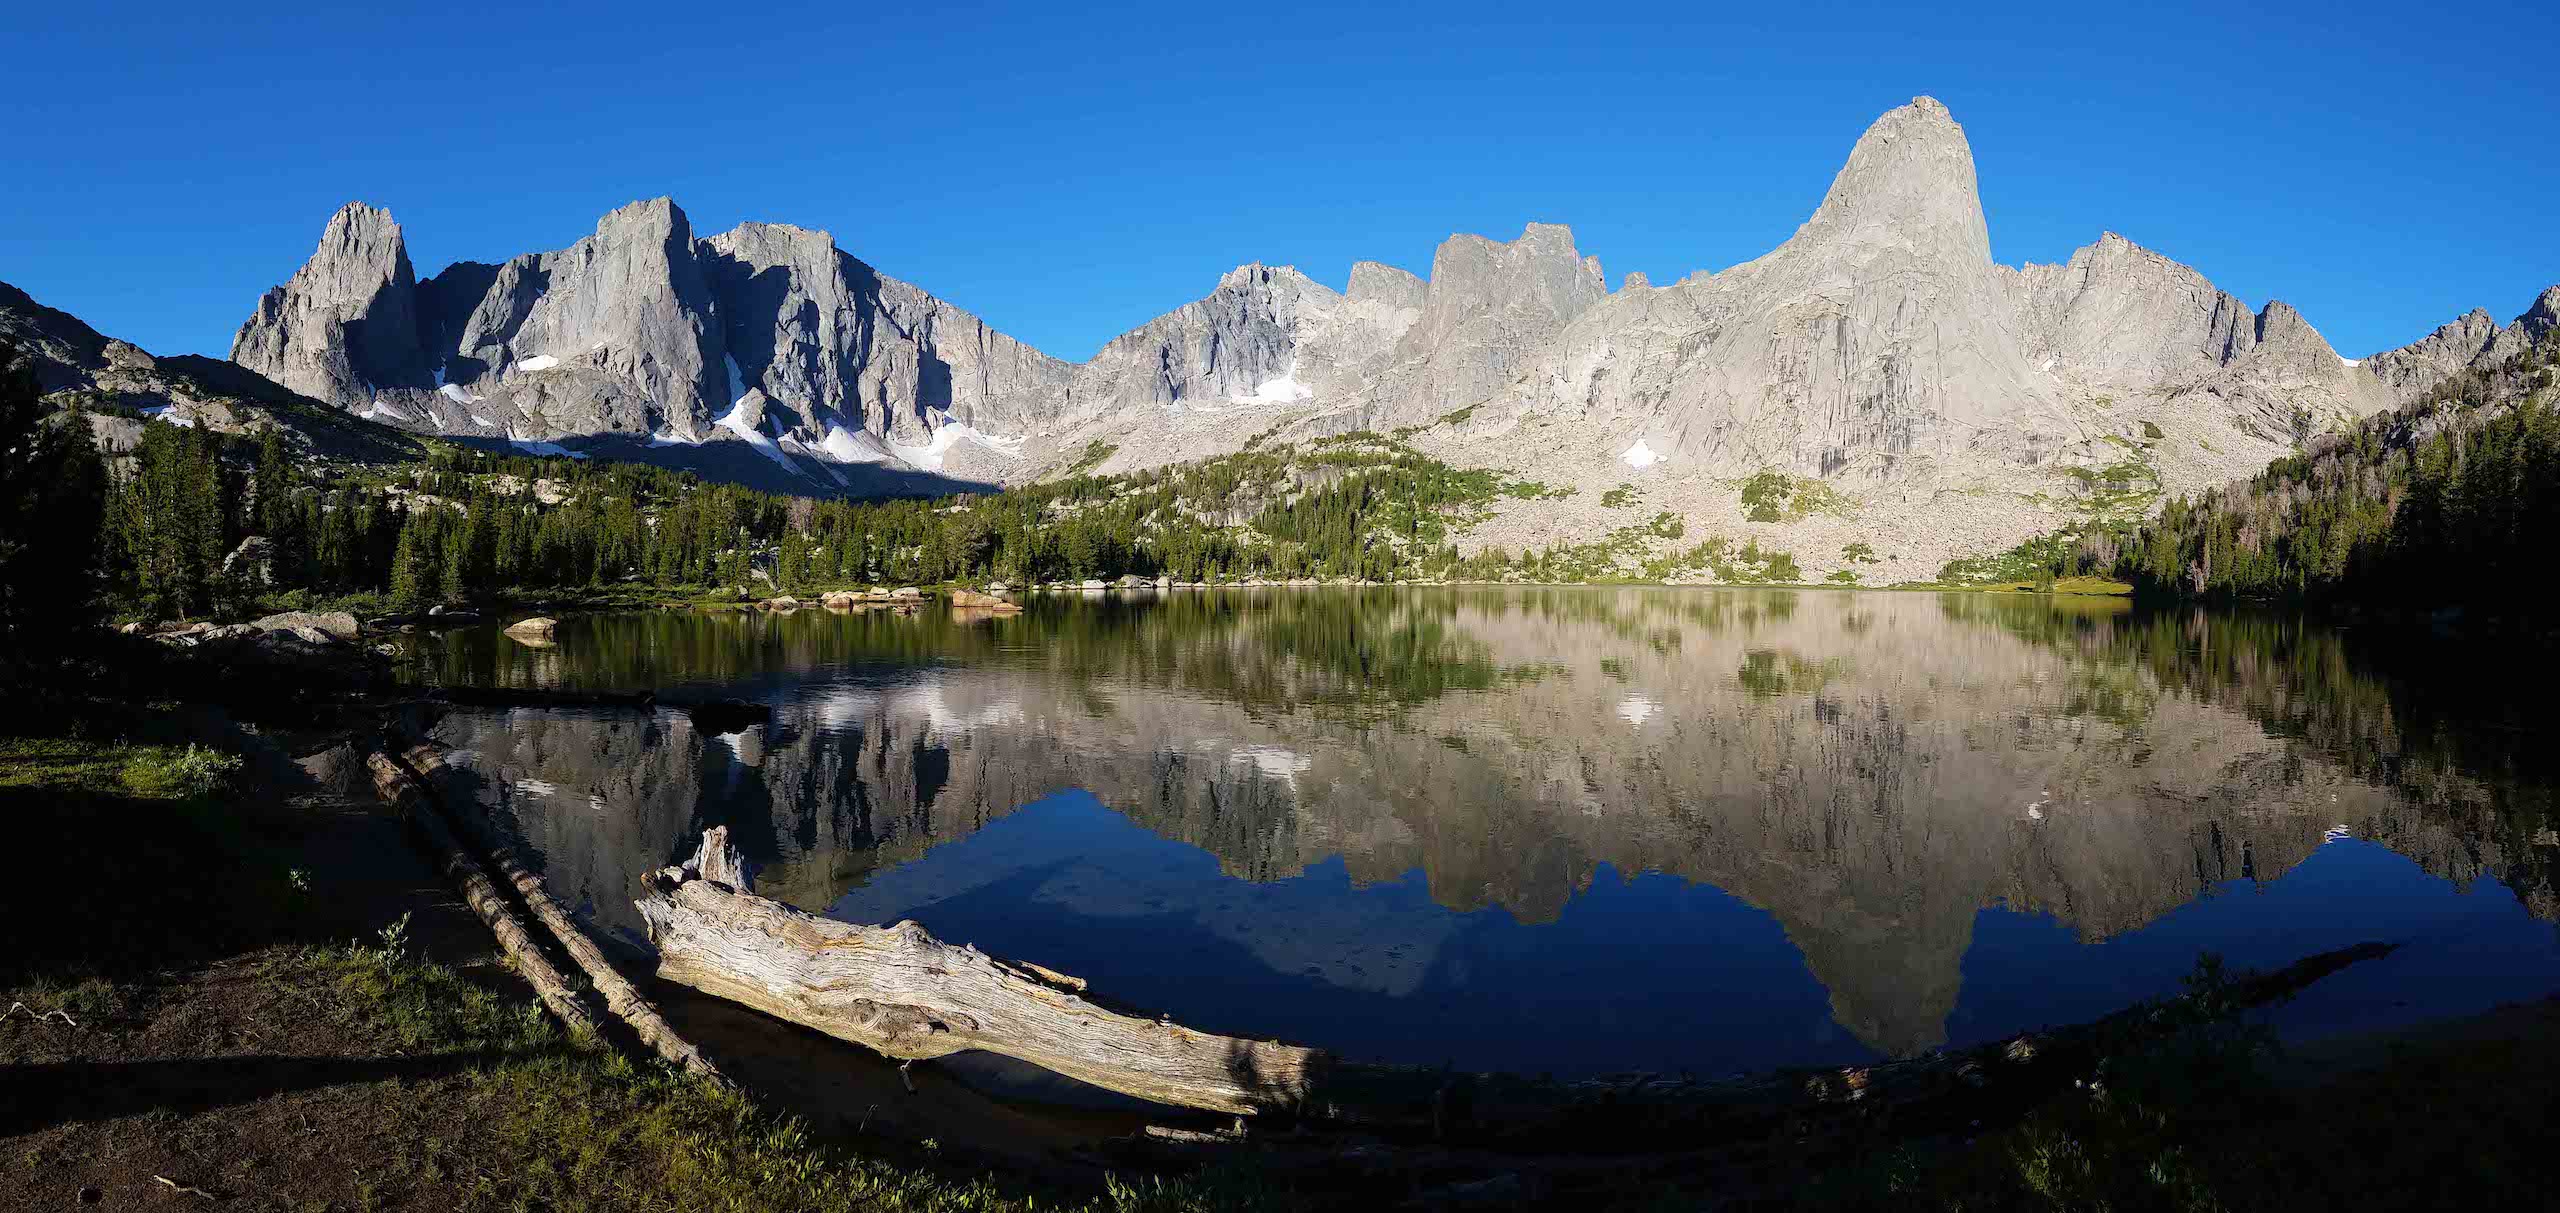 Lonesome Lake in Wyoming's Wind River Range. Photo by Brock Dallman